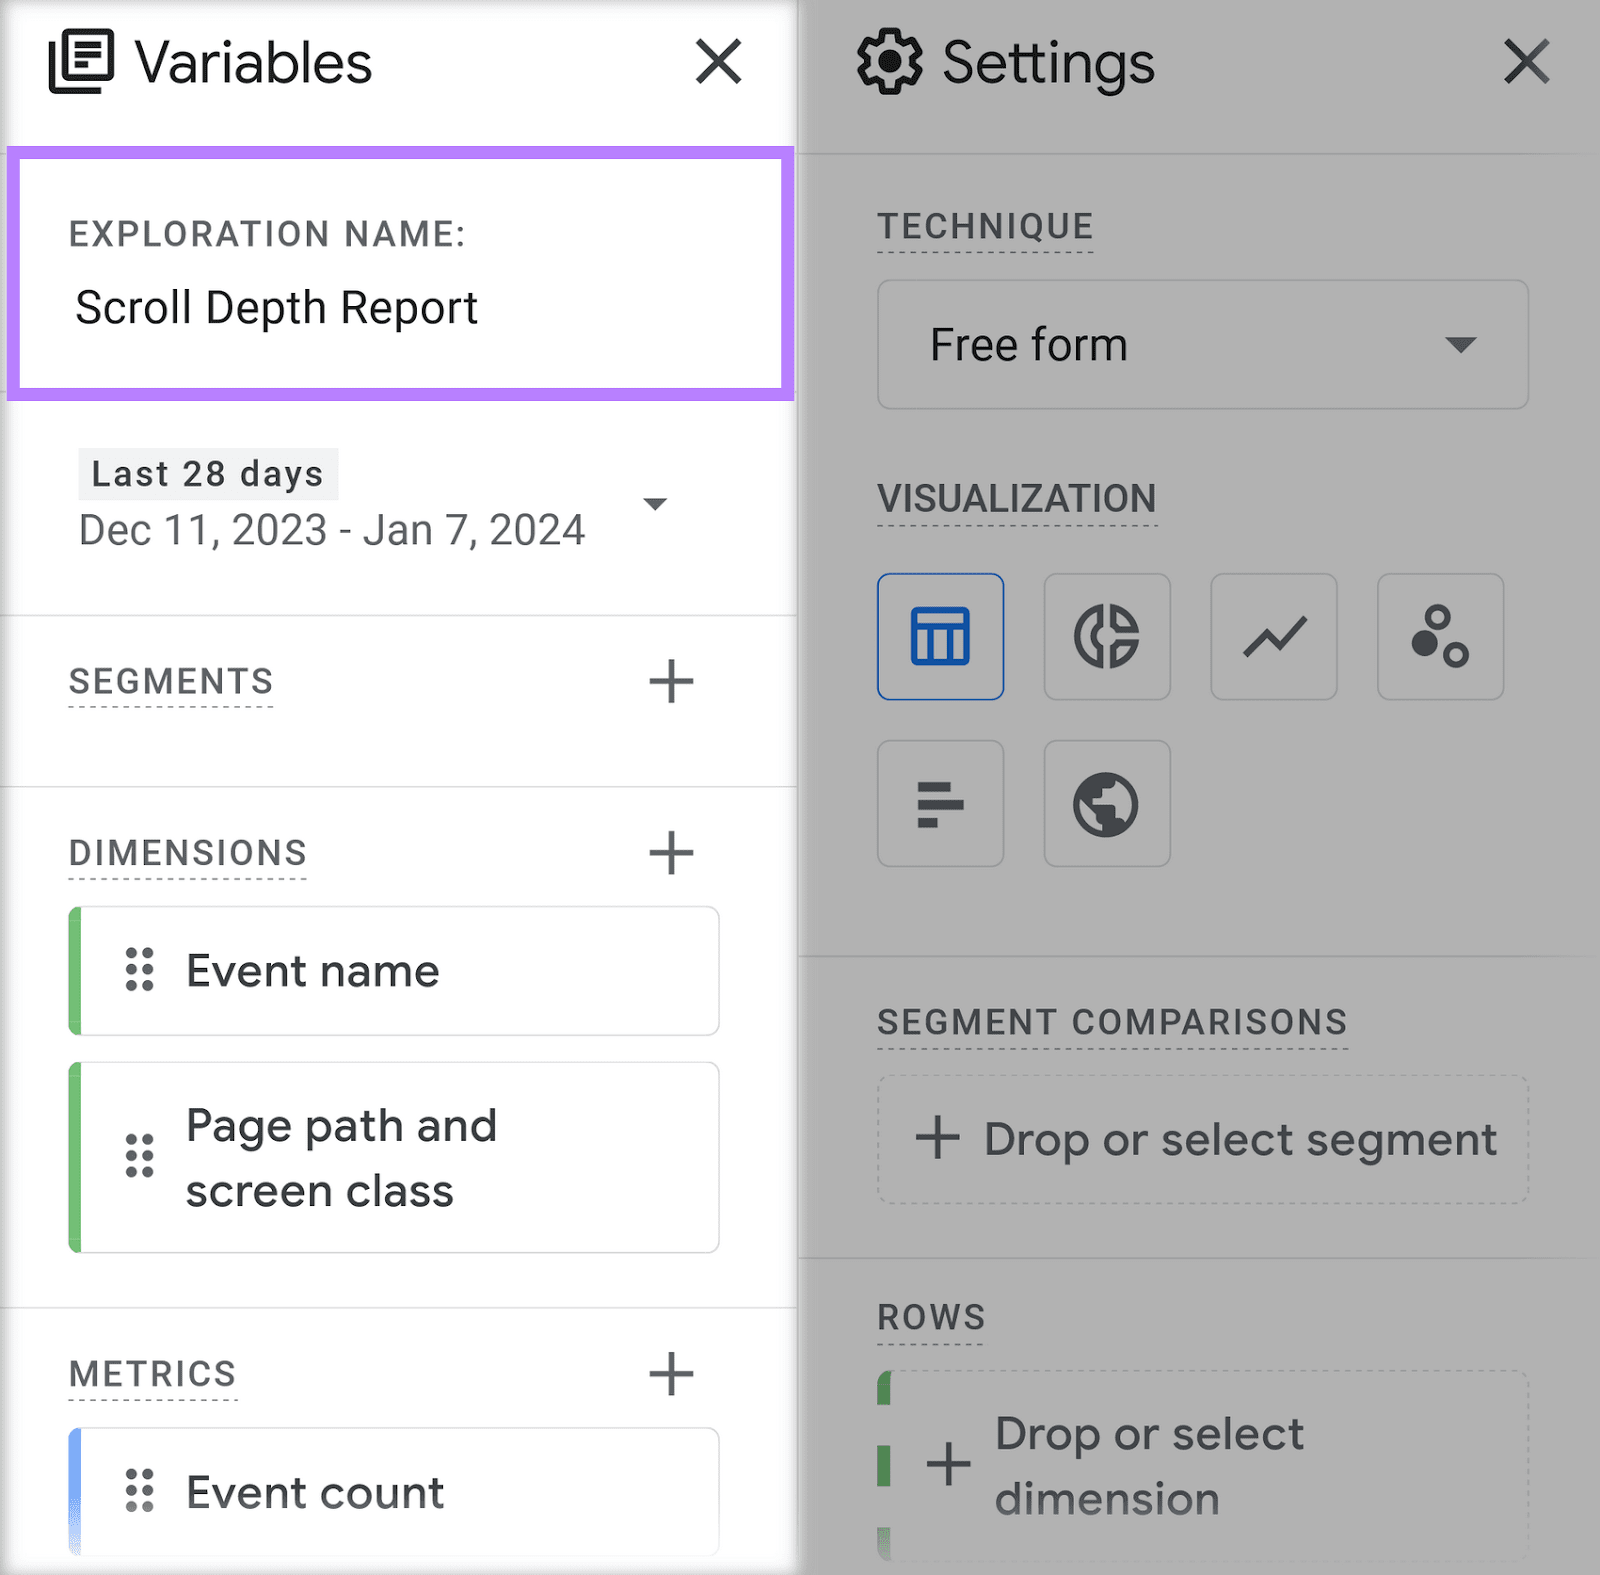 "Scroll Depth Report" added under “Exploration Name” field